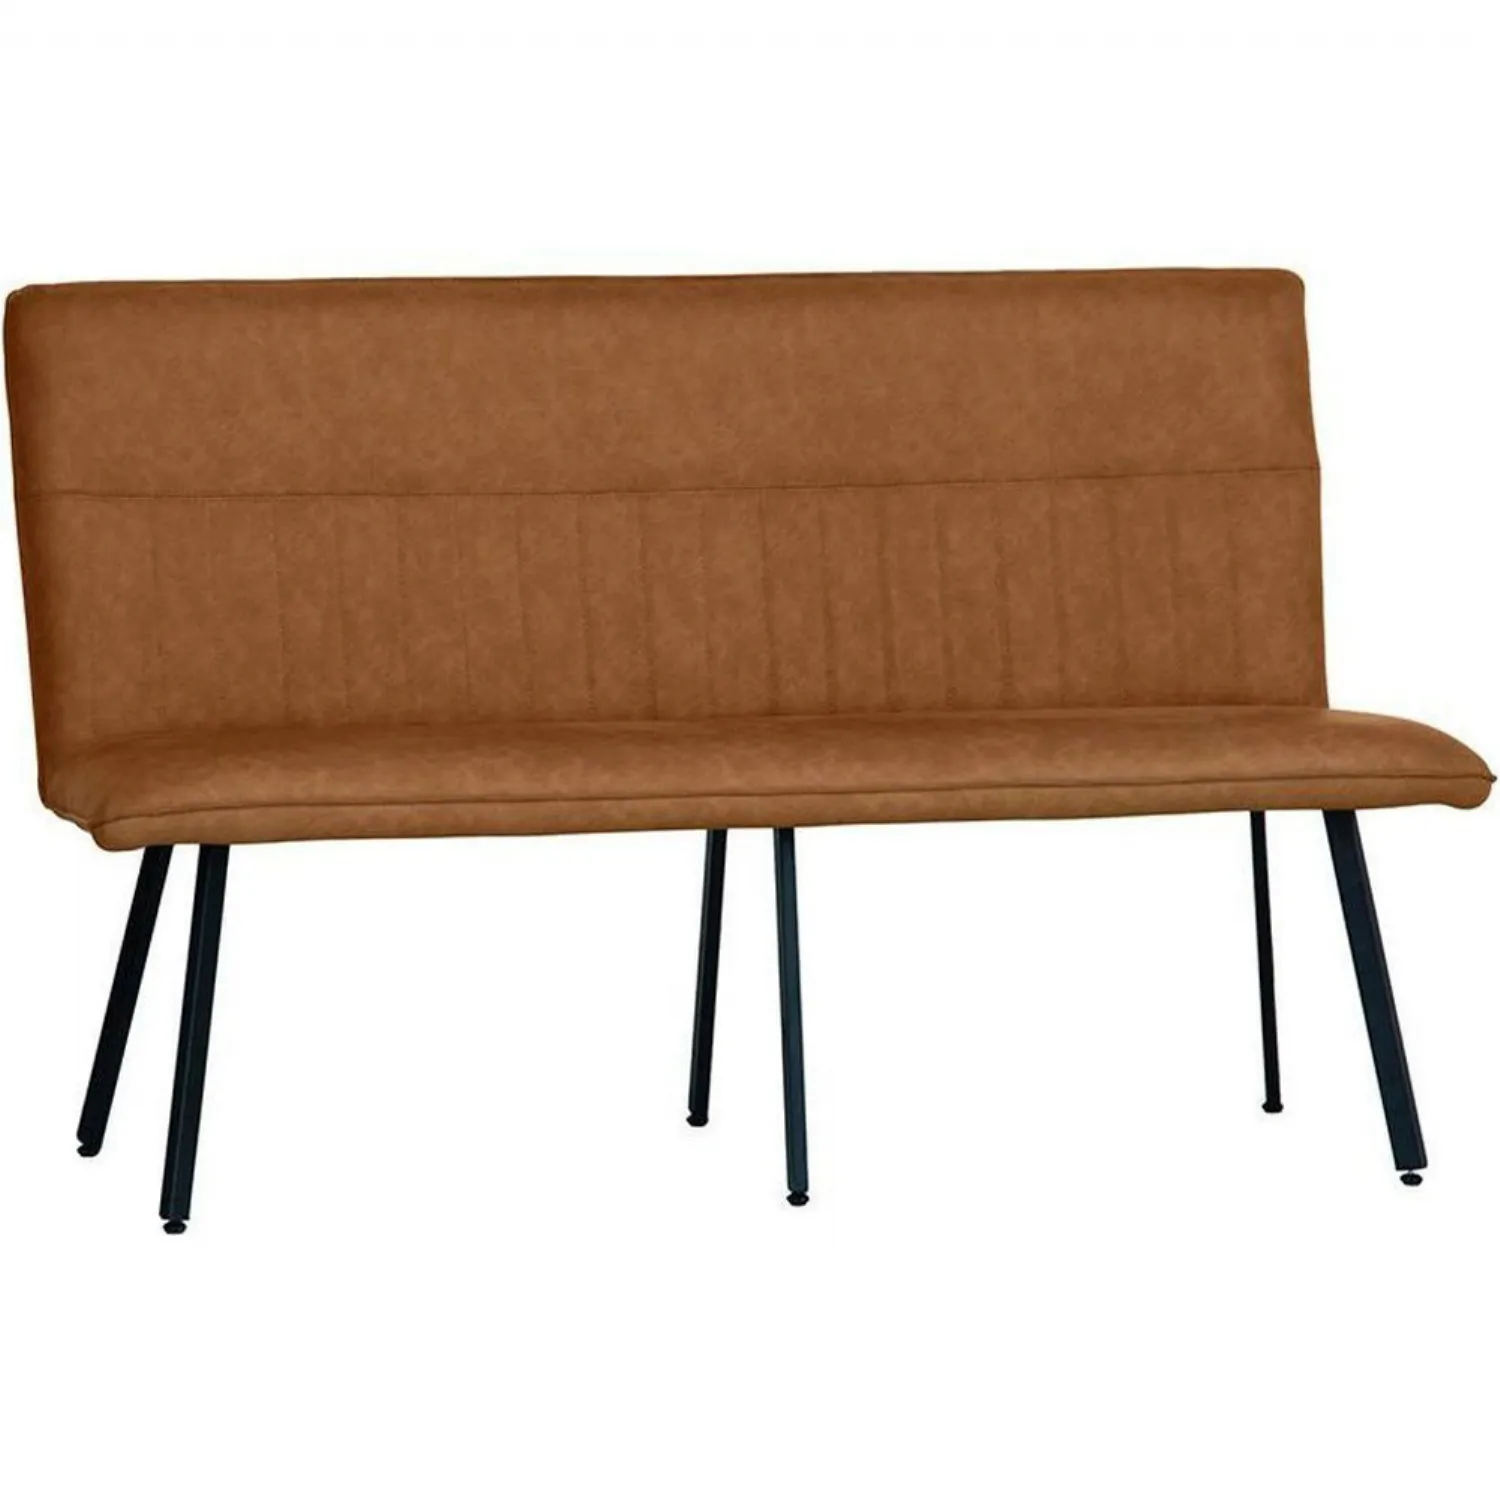 The Chair Collection 1.3m Dining Bench